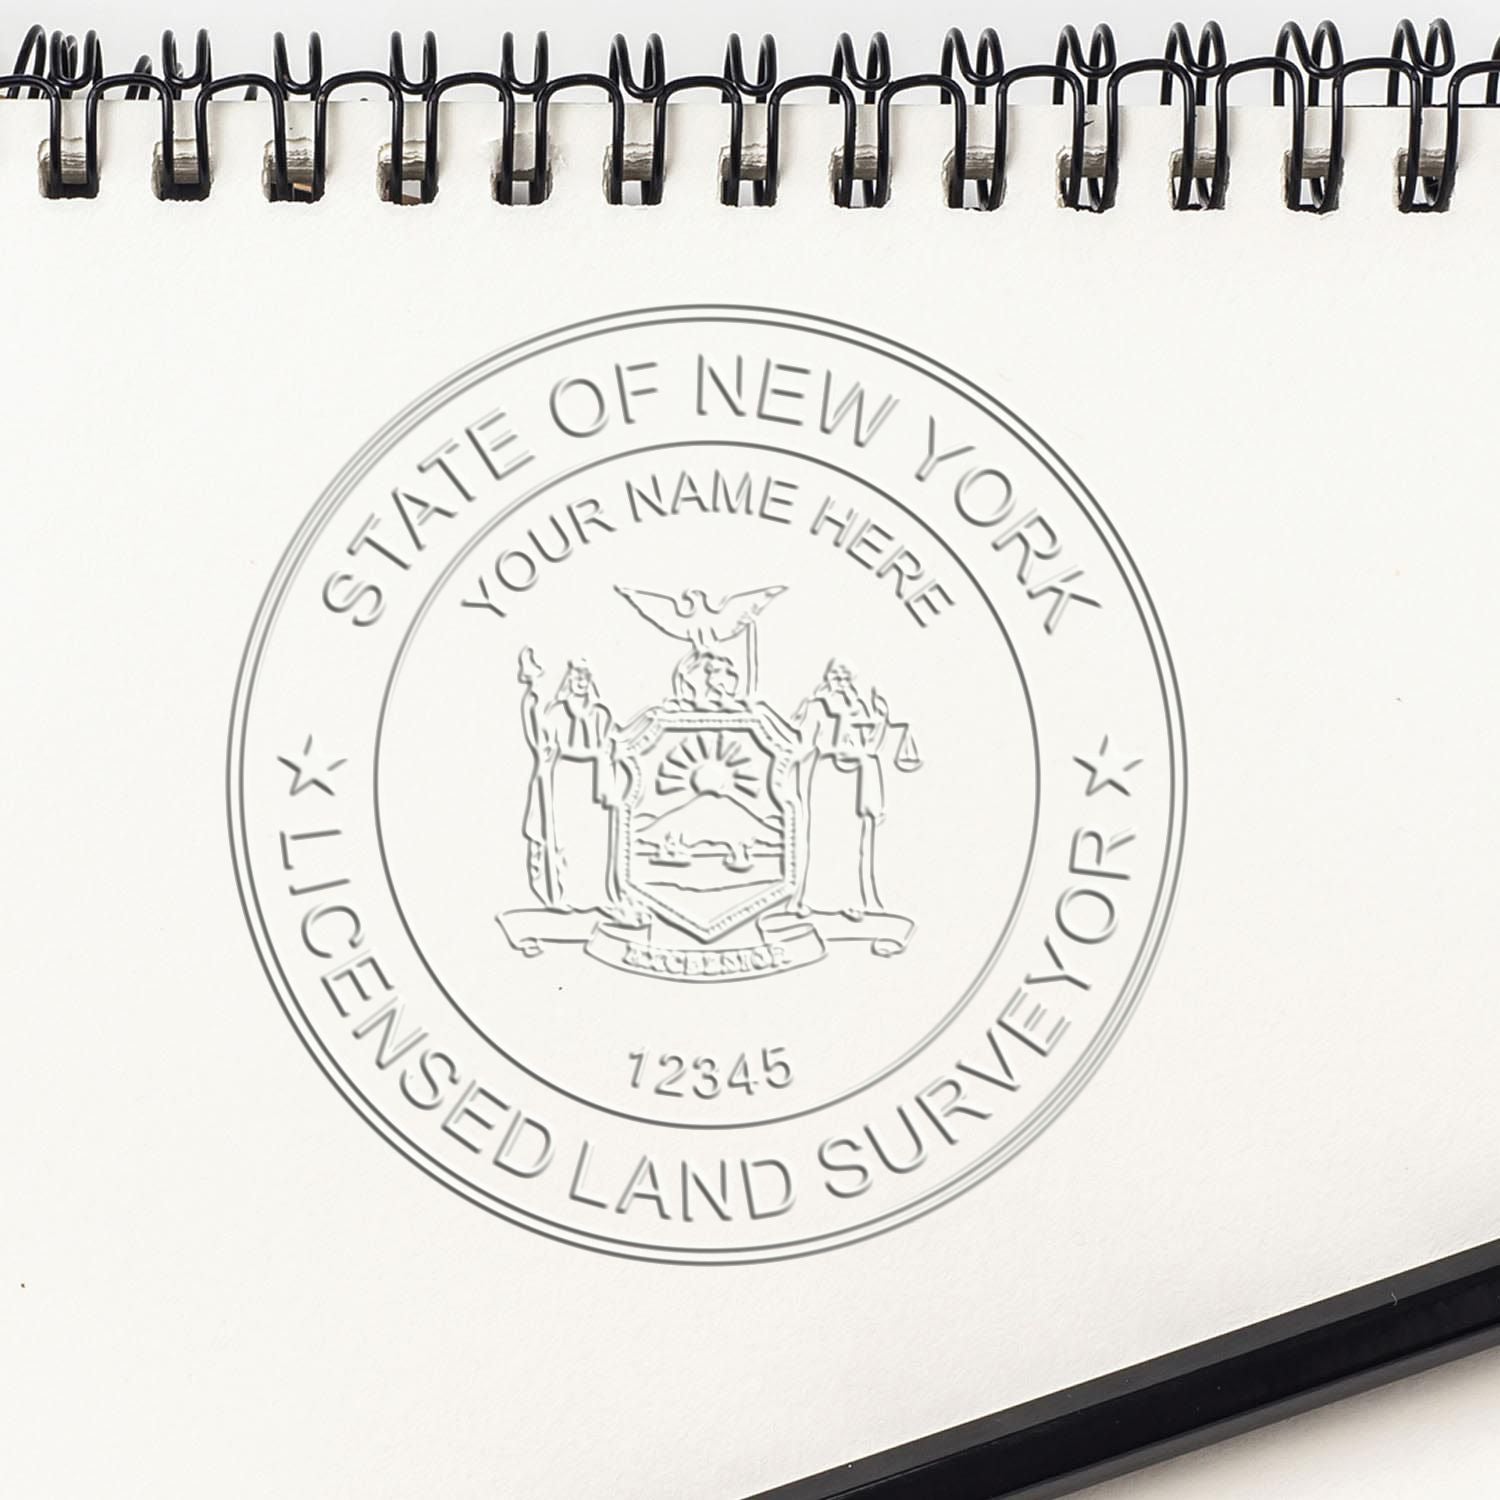 A lifestyle photo showing a stamped image of the Handheld New York Land Surveyor Seal on a piece of paper